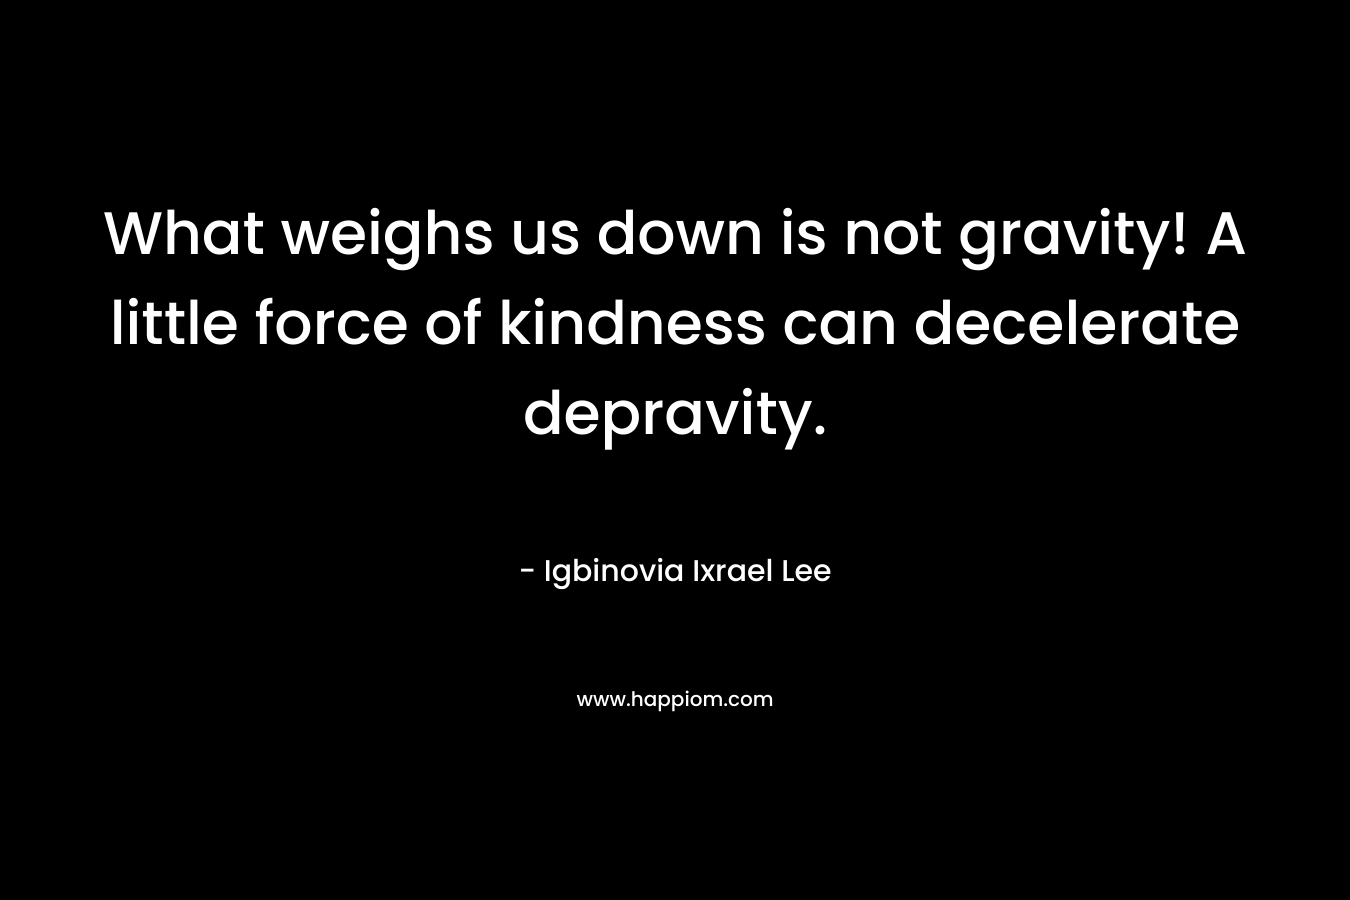 What weighs us down is not gravity! A little force of kindness can decelerate depravity.